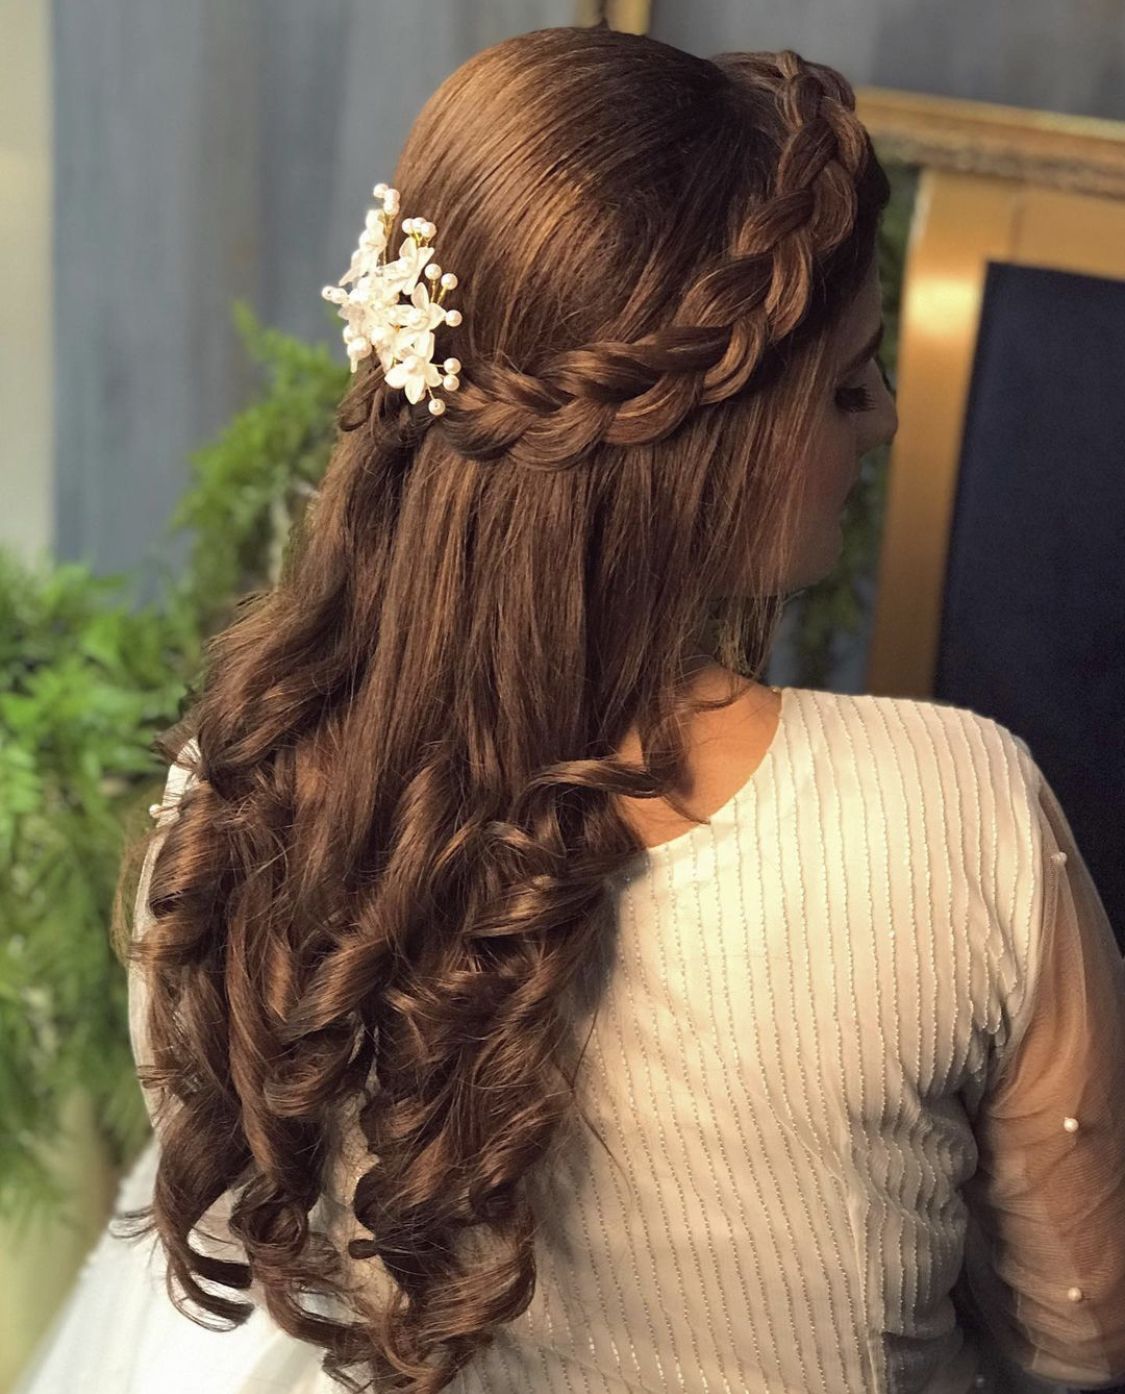 Bridal Trends 2020 - Choti Jewellery - The Trending Bridal Hair Accessory  For The Season ! - Witty Vows